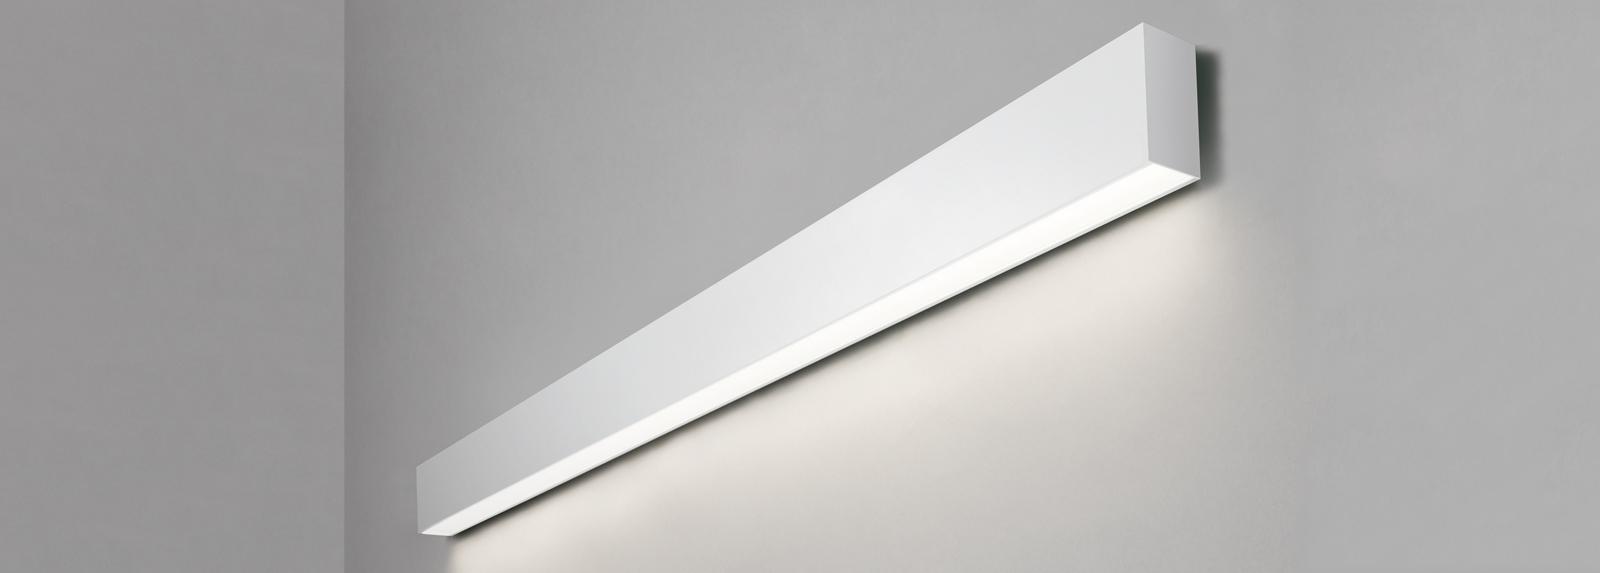 TIRET 600 | Wall-mounted linear luminaires